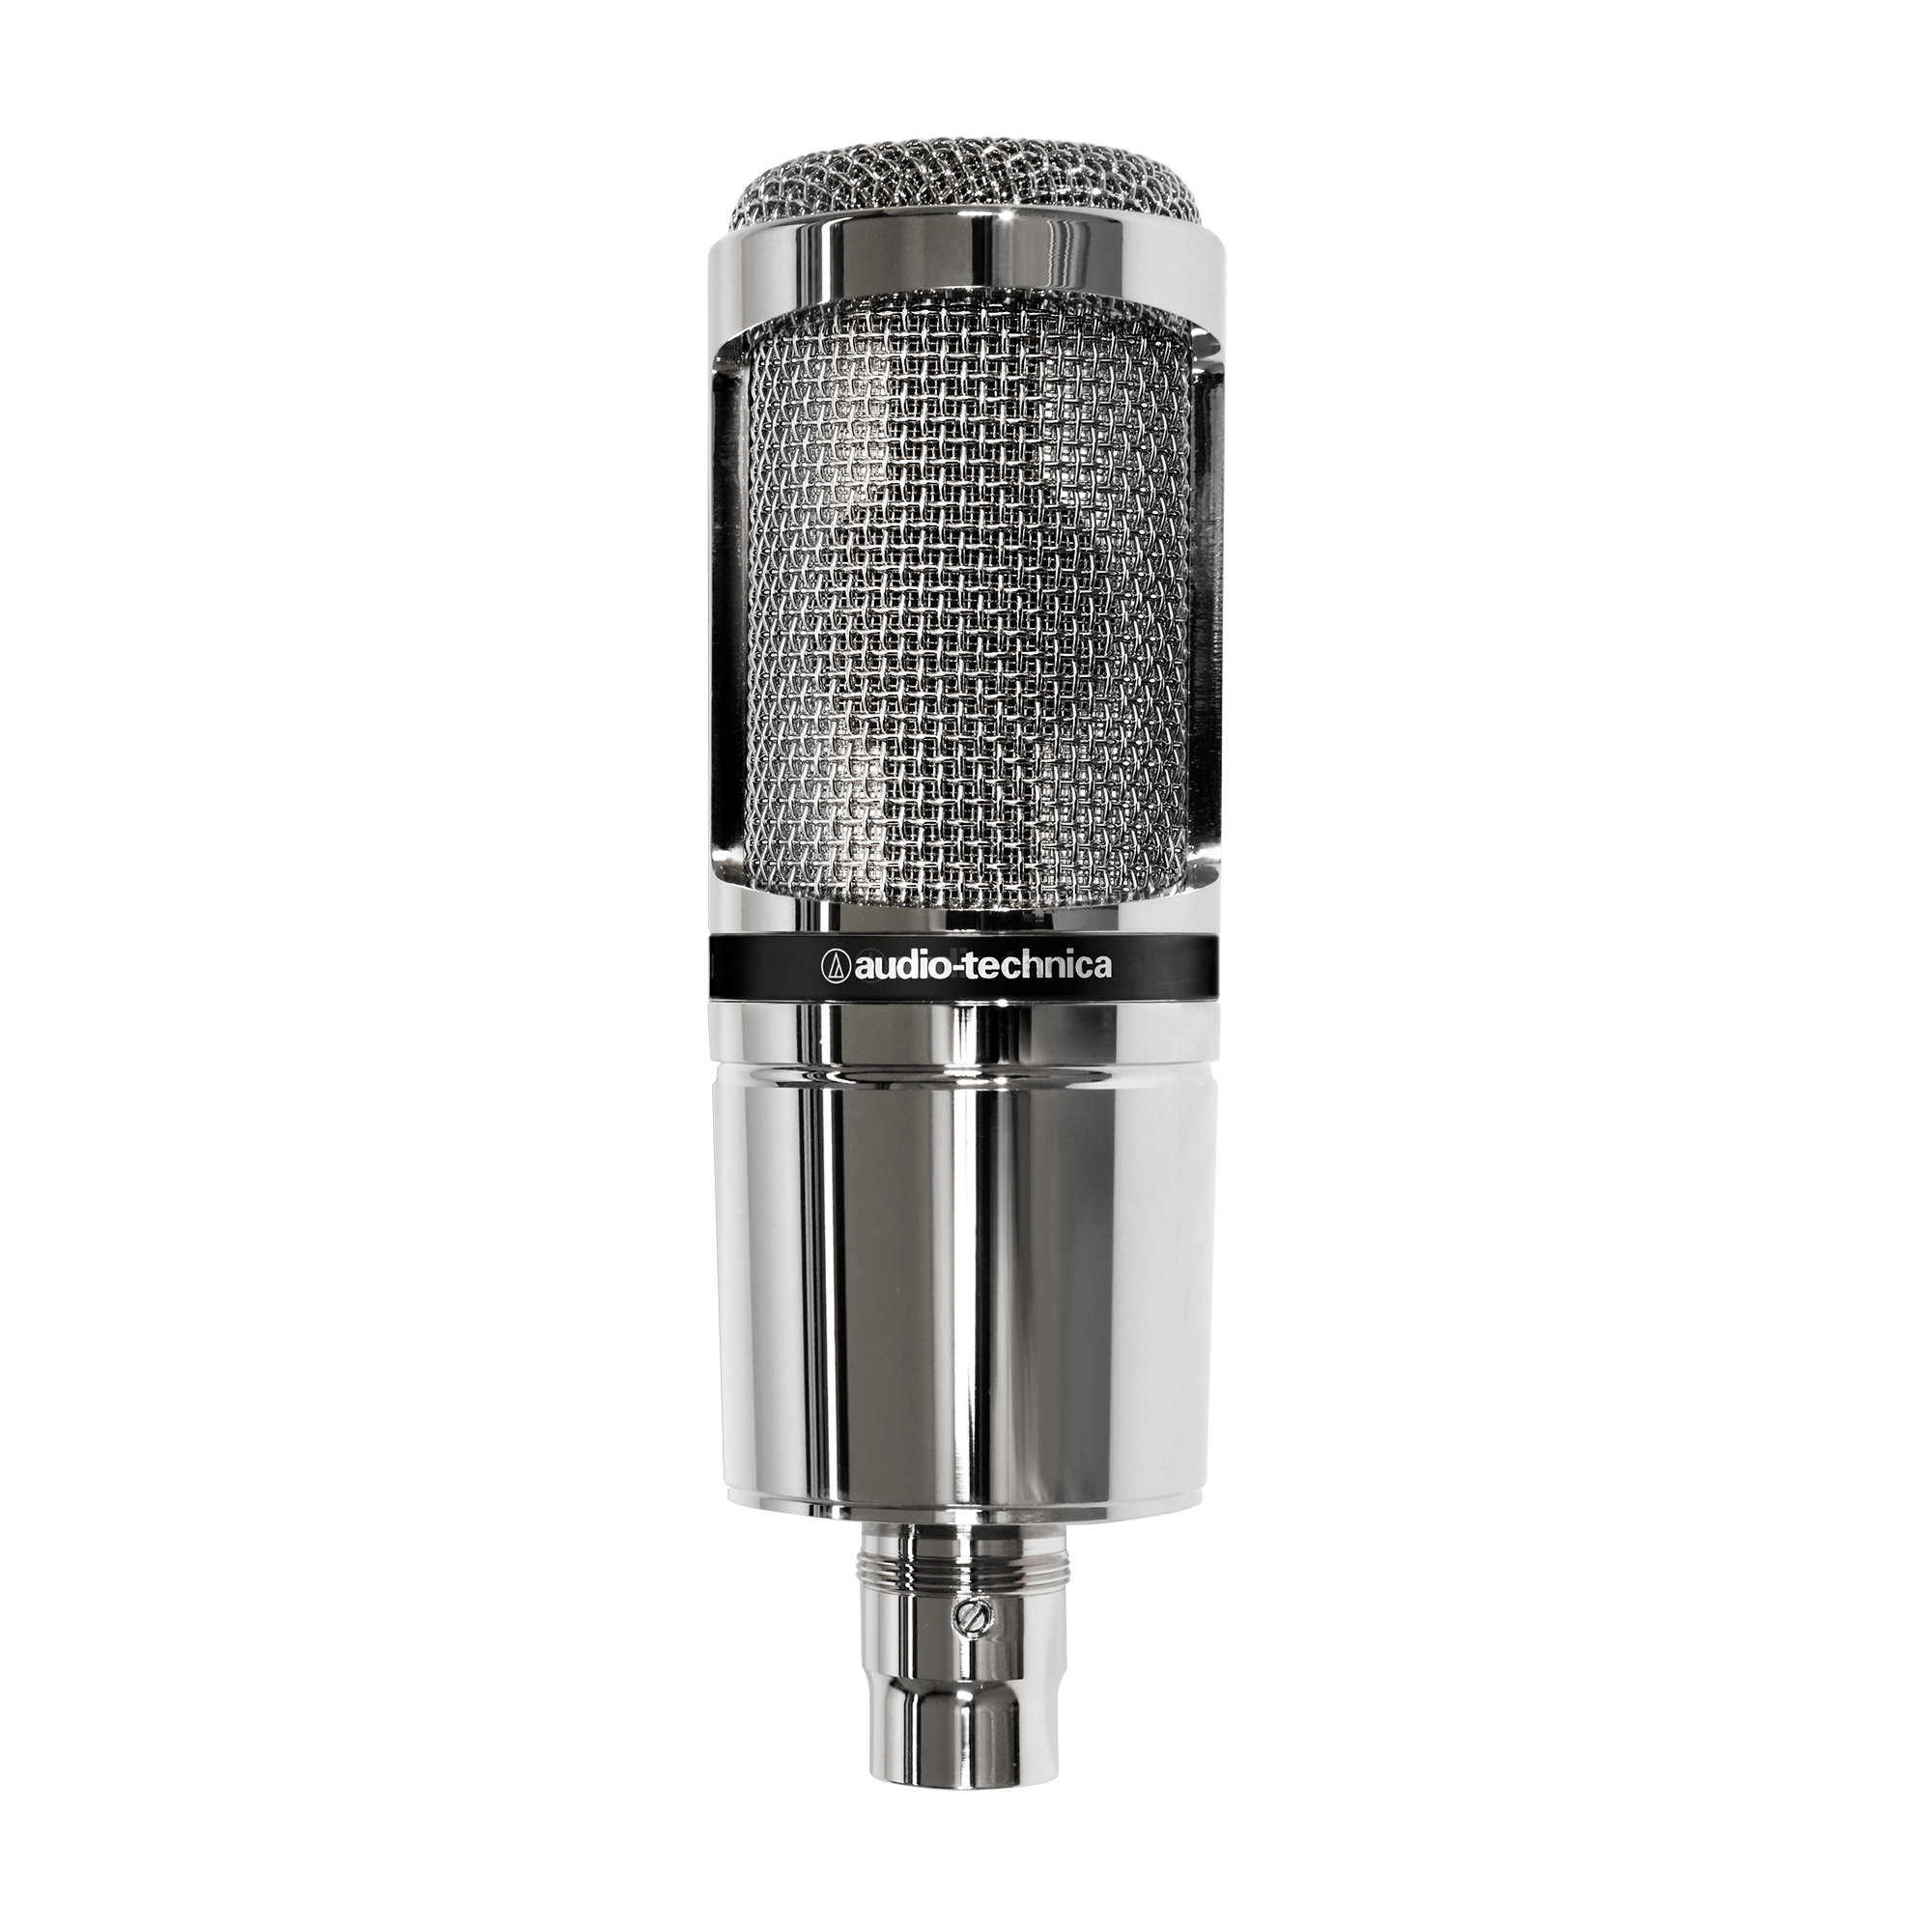 GetUSCart- Audio Technica AT2020 Cardioid Condenser Studio XLR Microphone  for Vocals, Podcasting, Livestreaming Bundle with Blucoil Portable USB Audio  Interface for Windows and Mac, and 10-FT Balanced XLR Cable